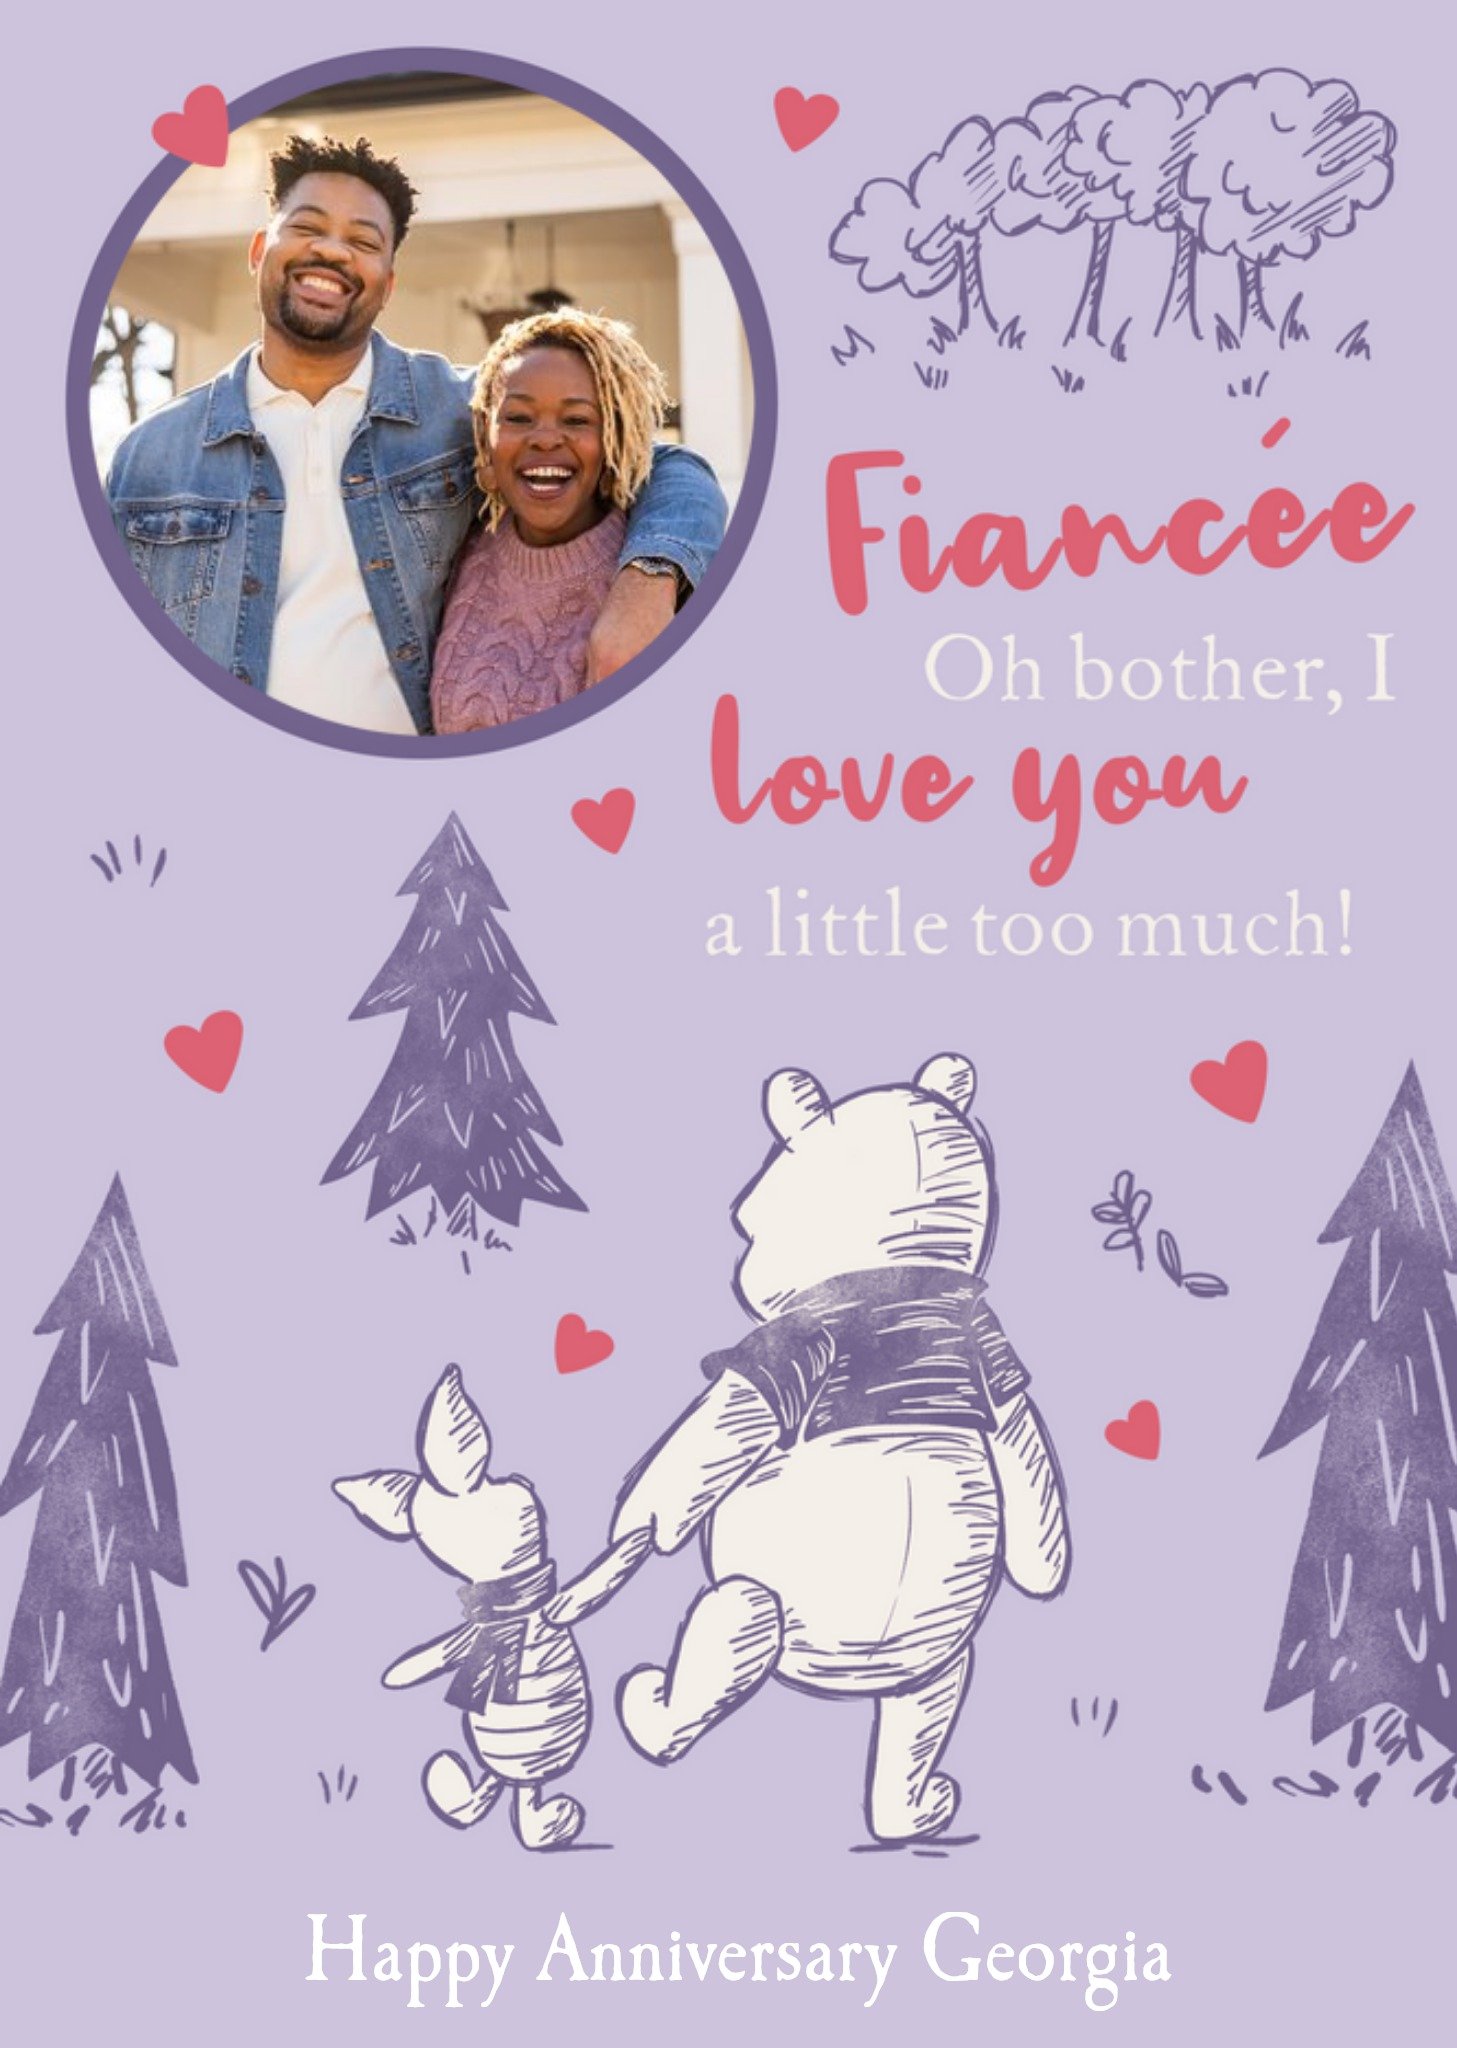 Disney Winnie The Pooh Fiancee I Love You A Little Too Much Photo Upload Anniversary Card, Large